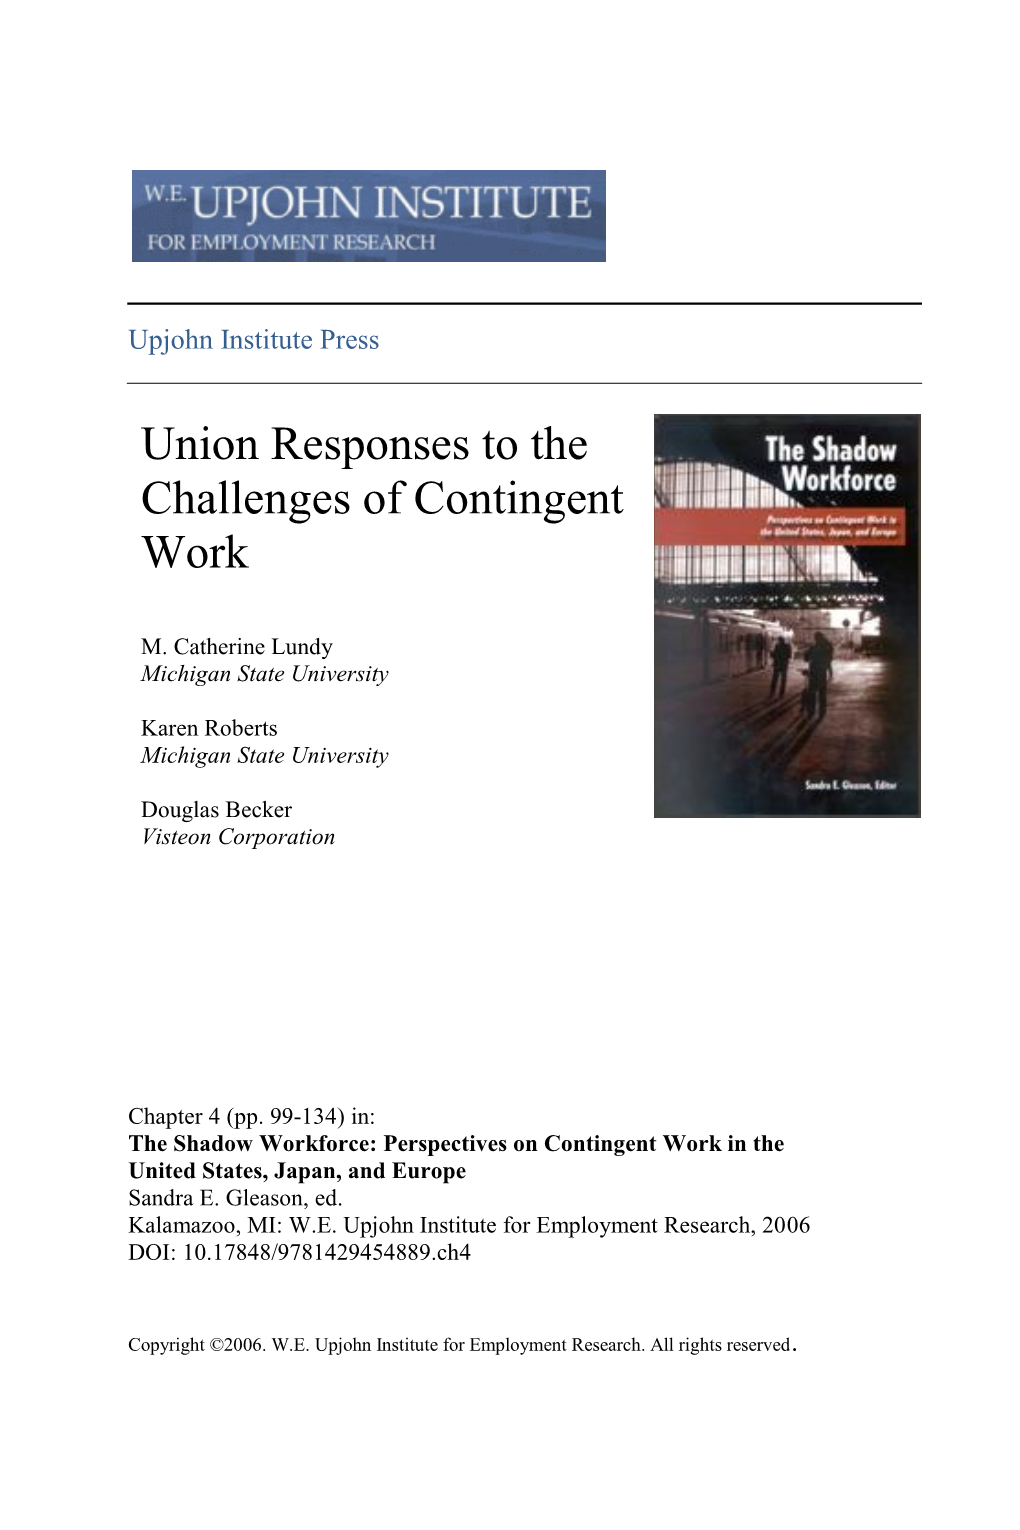 Union Responses to the Challenges of Contingent Work Arrangements